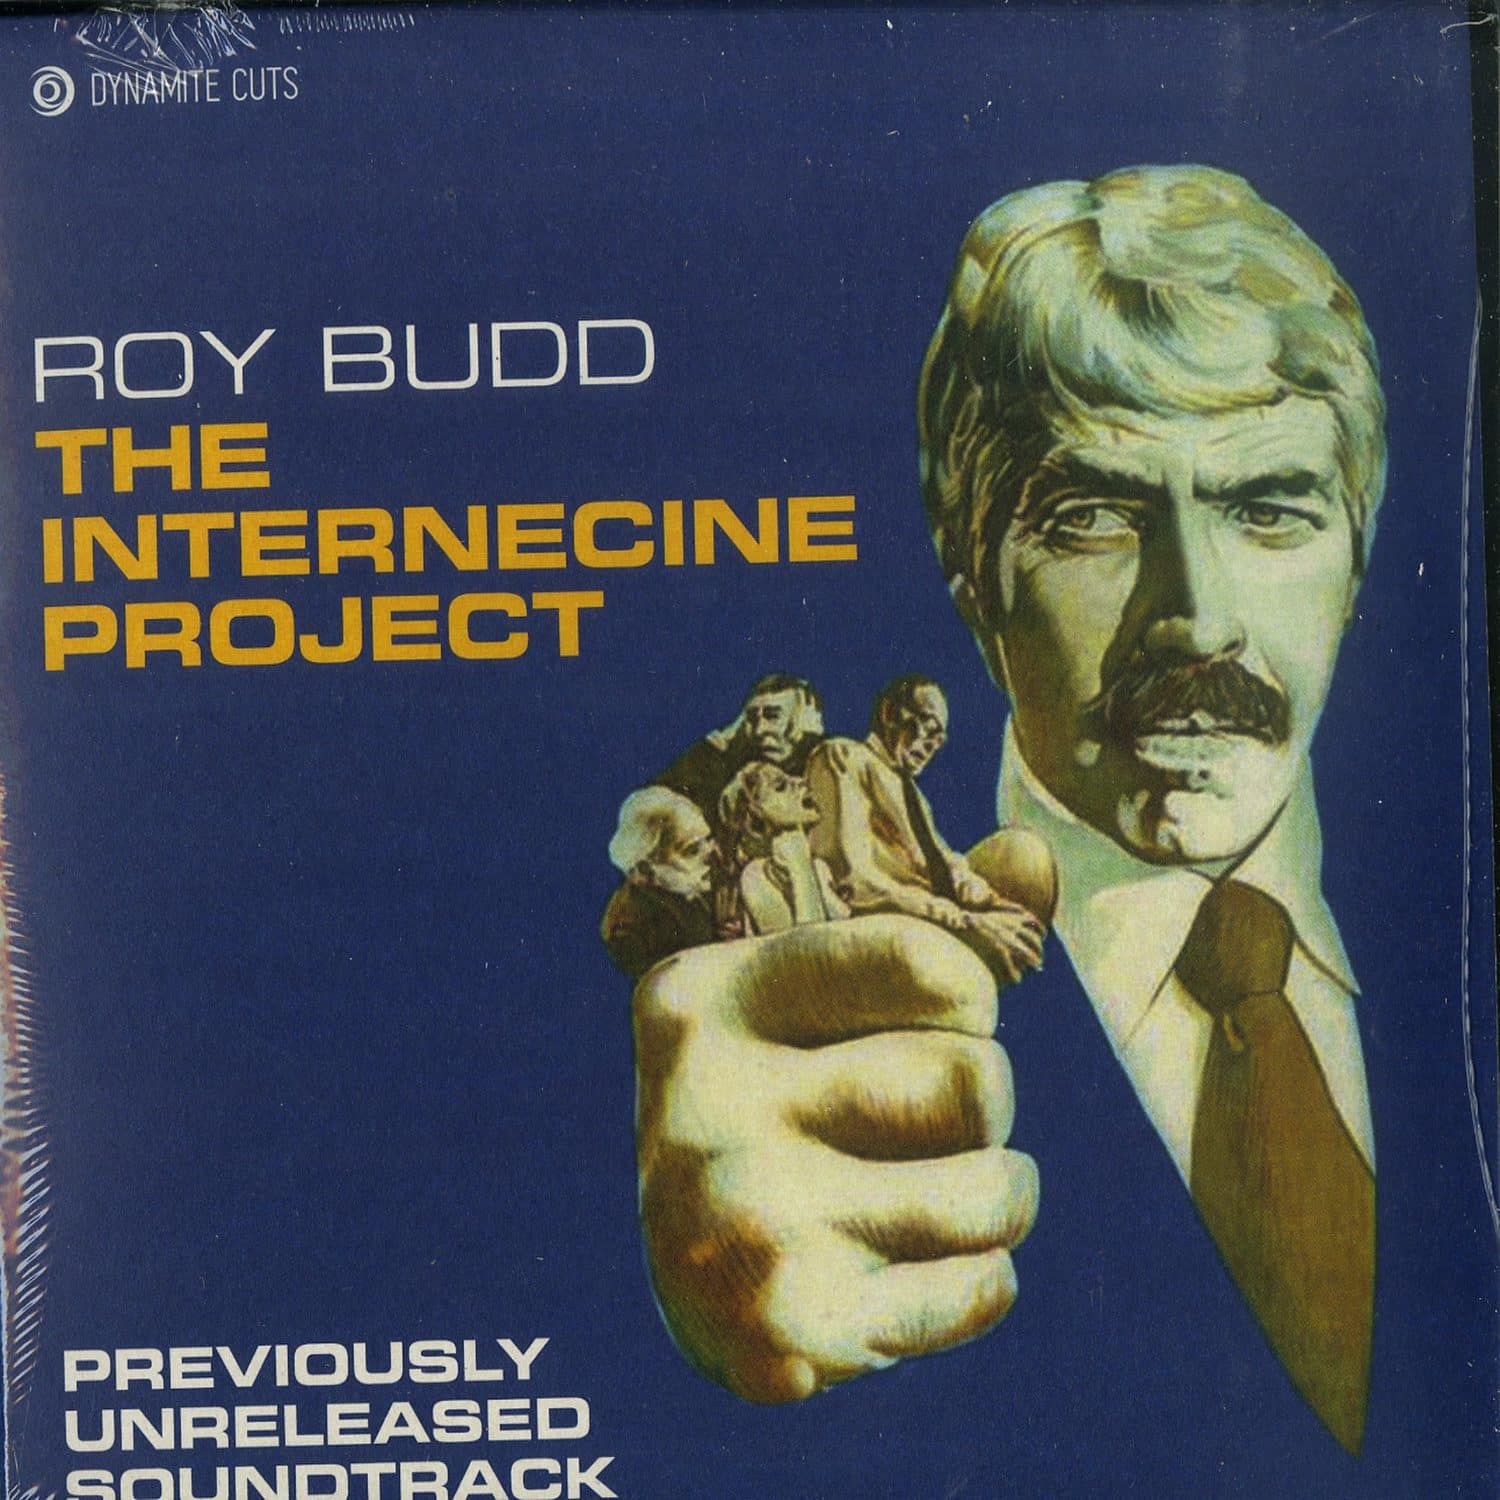 Roy Budd - THE INTERNECINE PROJECT O.S.T. 